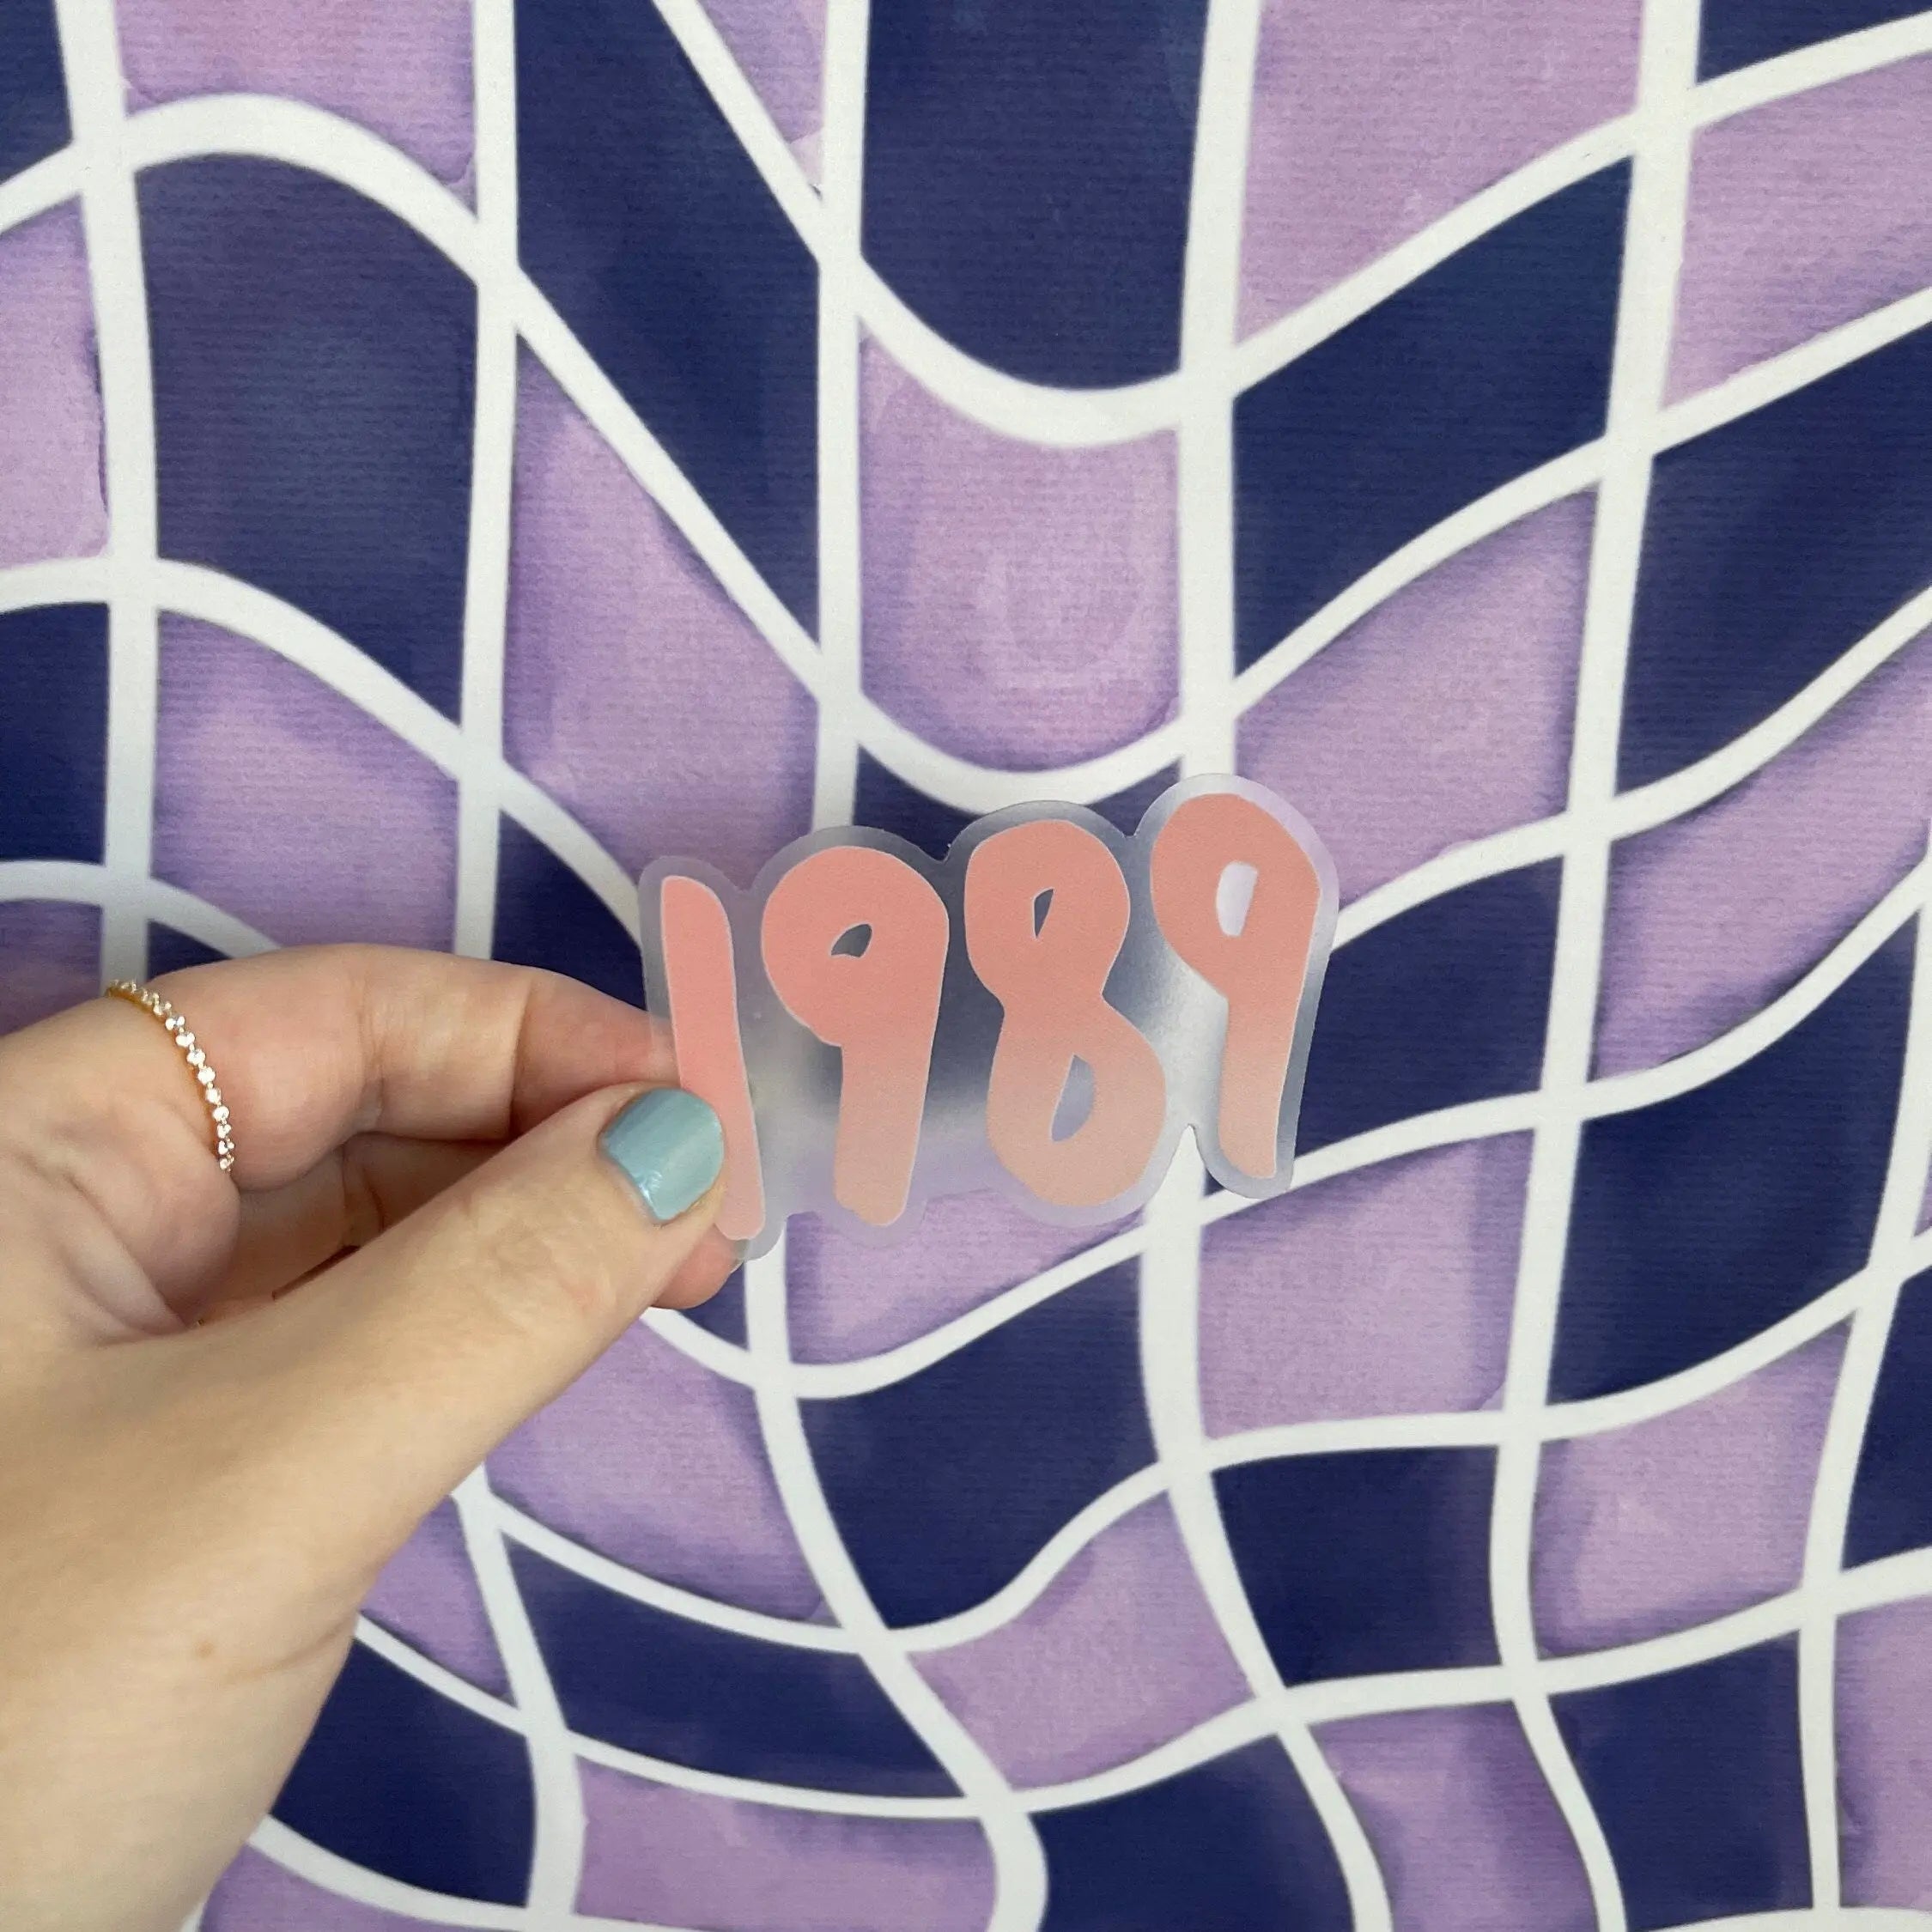 CLEAR 1989 sticker - pink MangoIllustrated